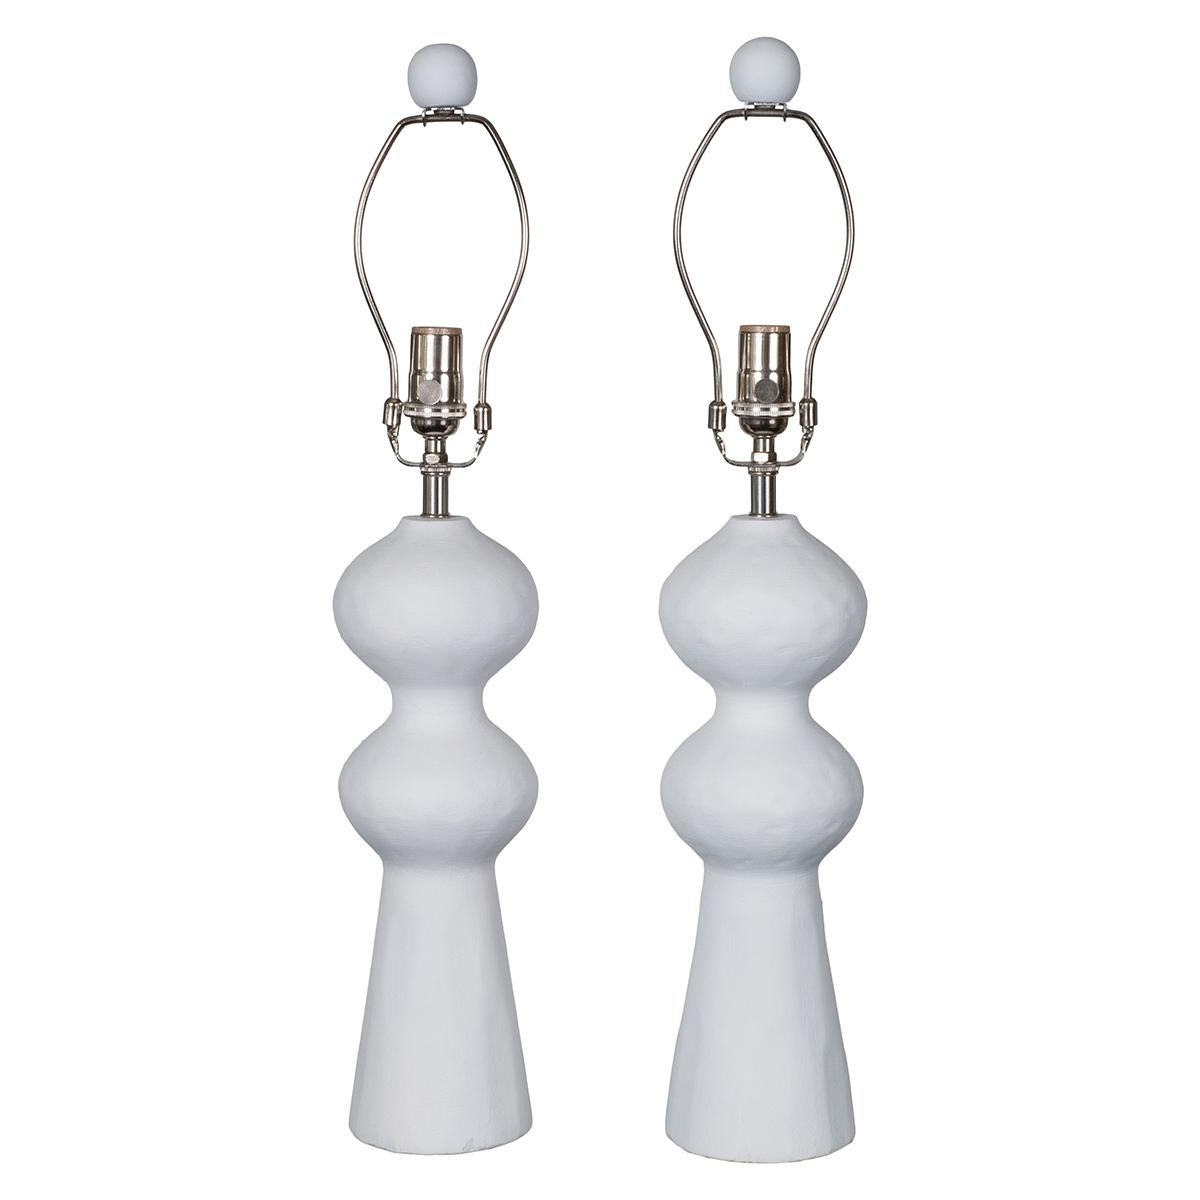 Pair of sculptural composition table lamps with organic form and matching finial.